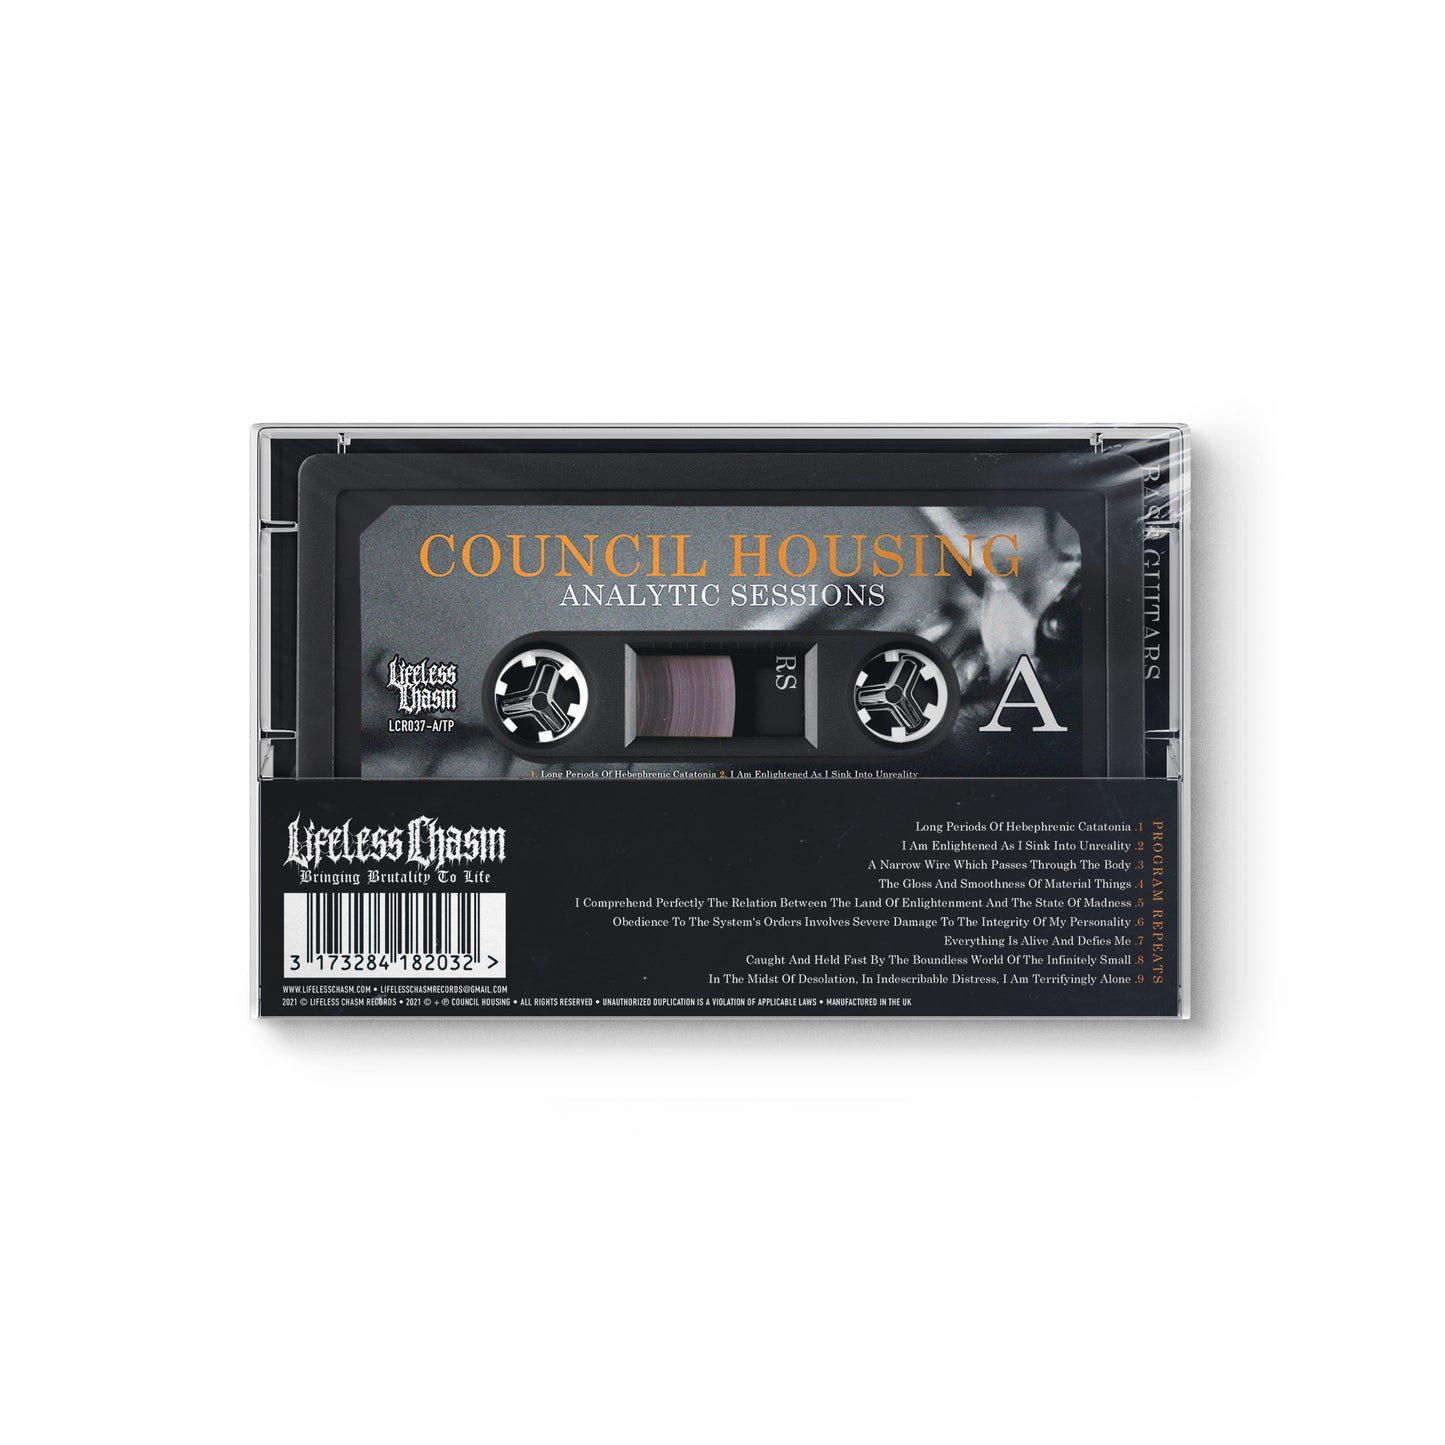 Council Housing "Analytic Sessions" CASSETTE